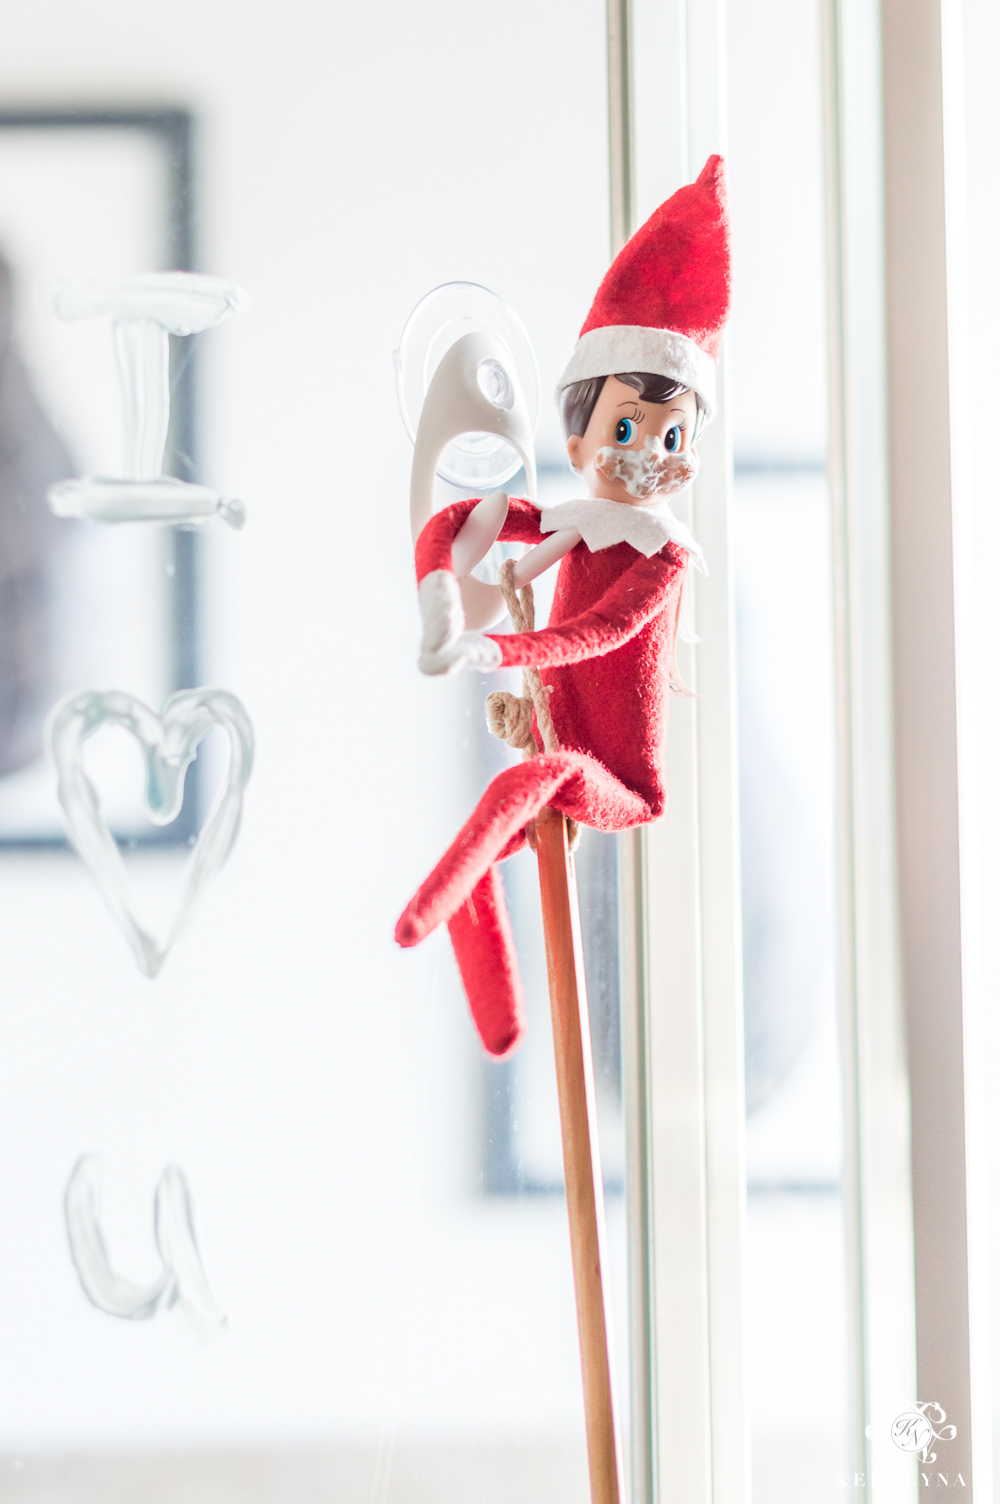 Shower and shaving cream surprise for your husband with elf on the shelf